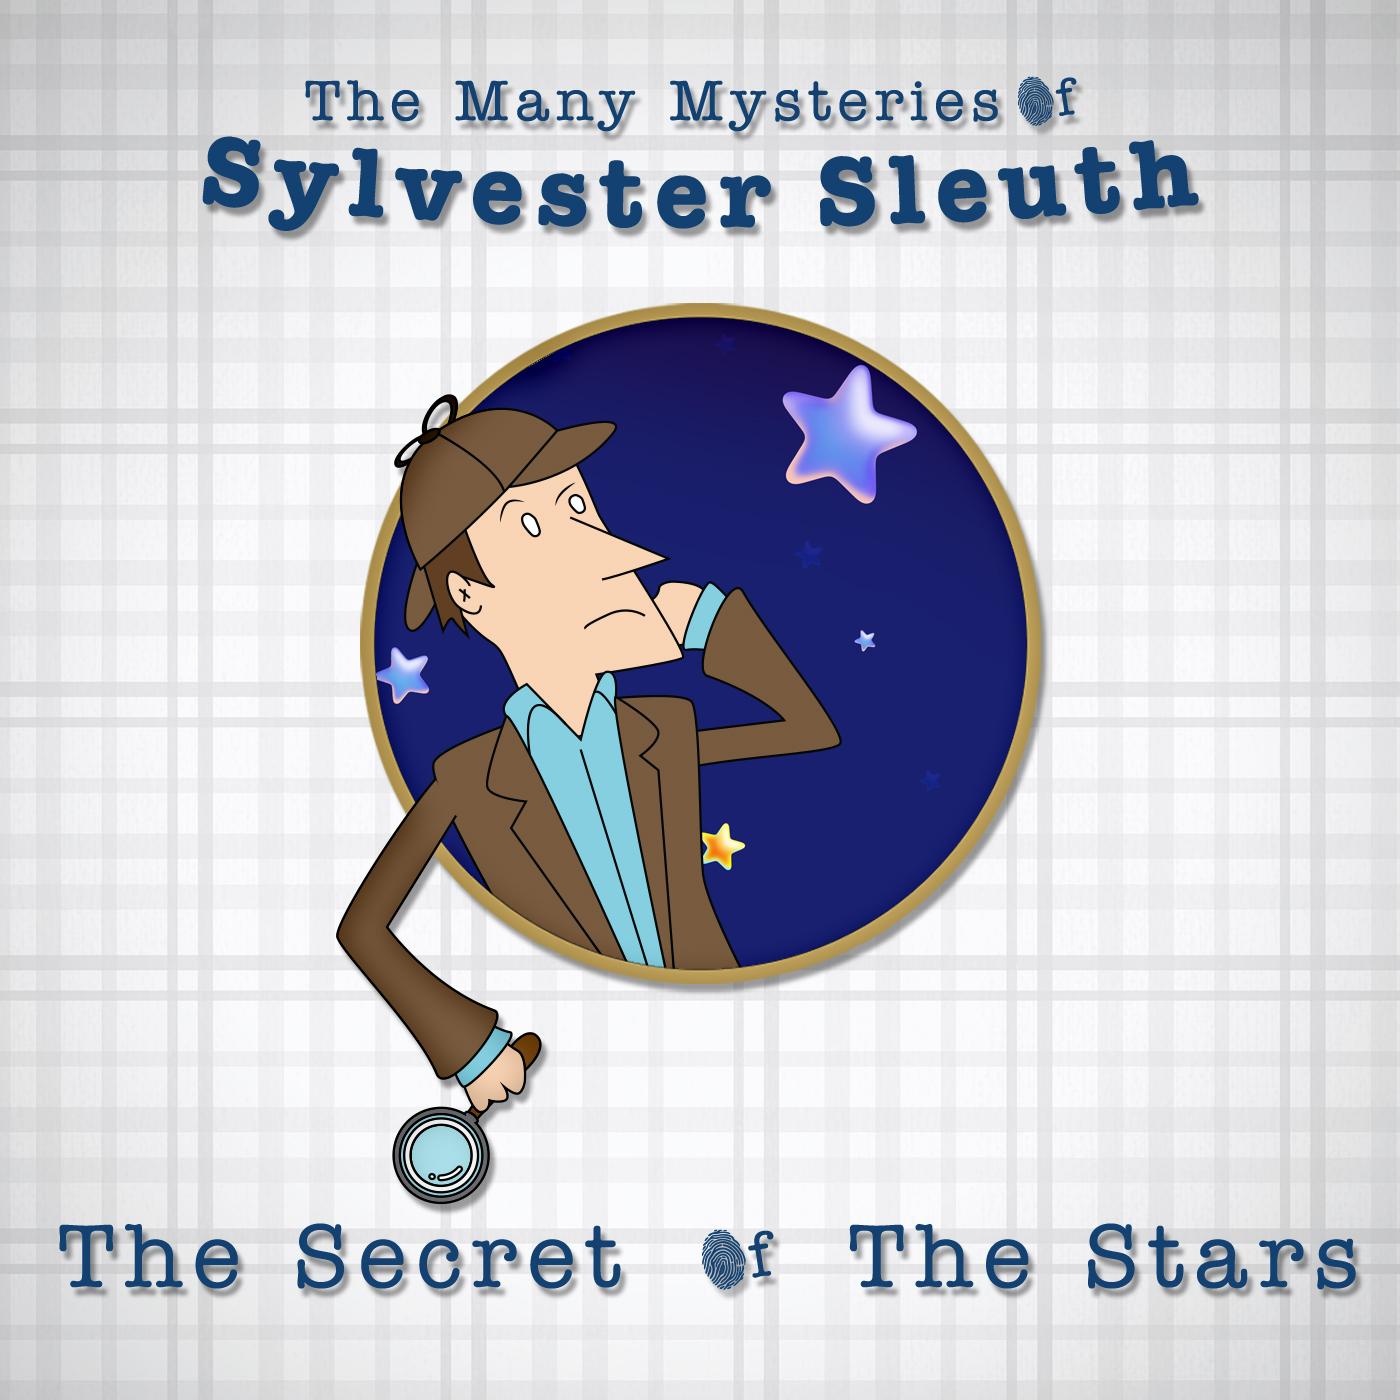 Sylvester Sleuth and the Secret of the Stars